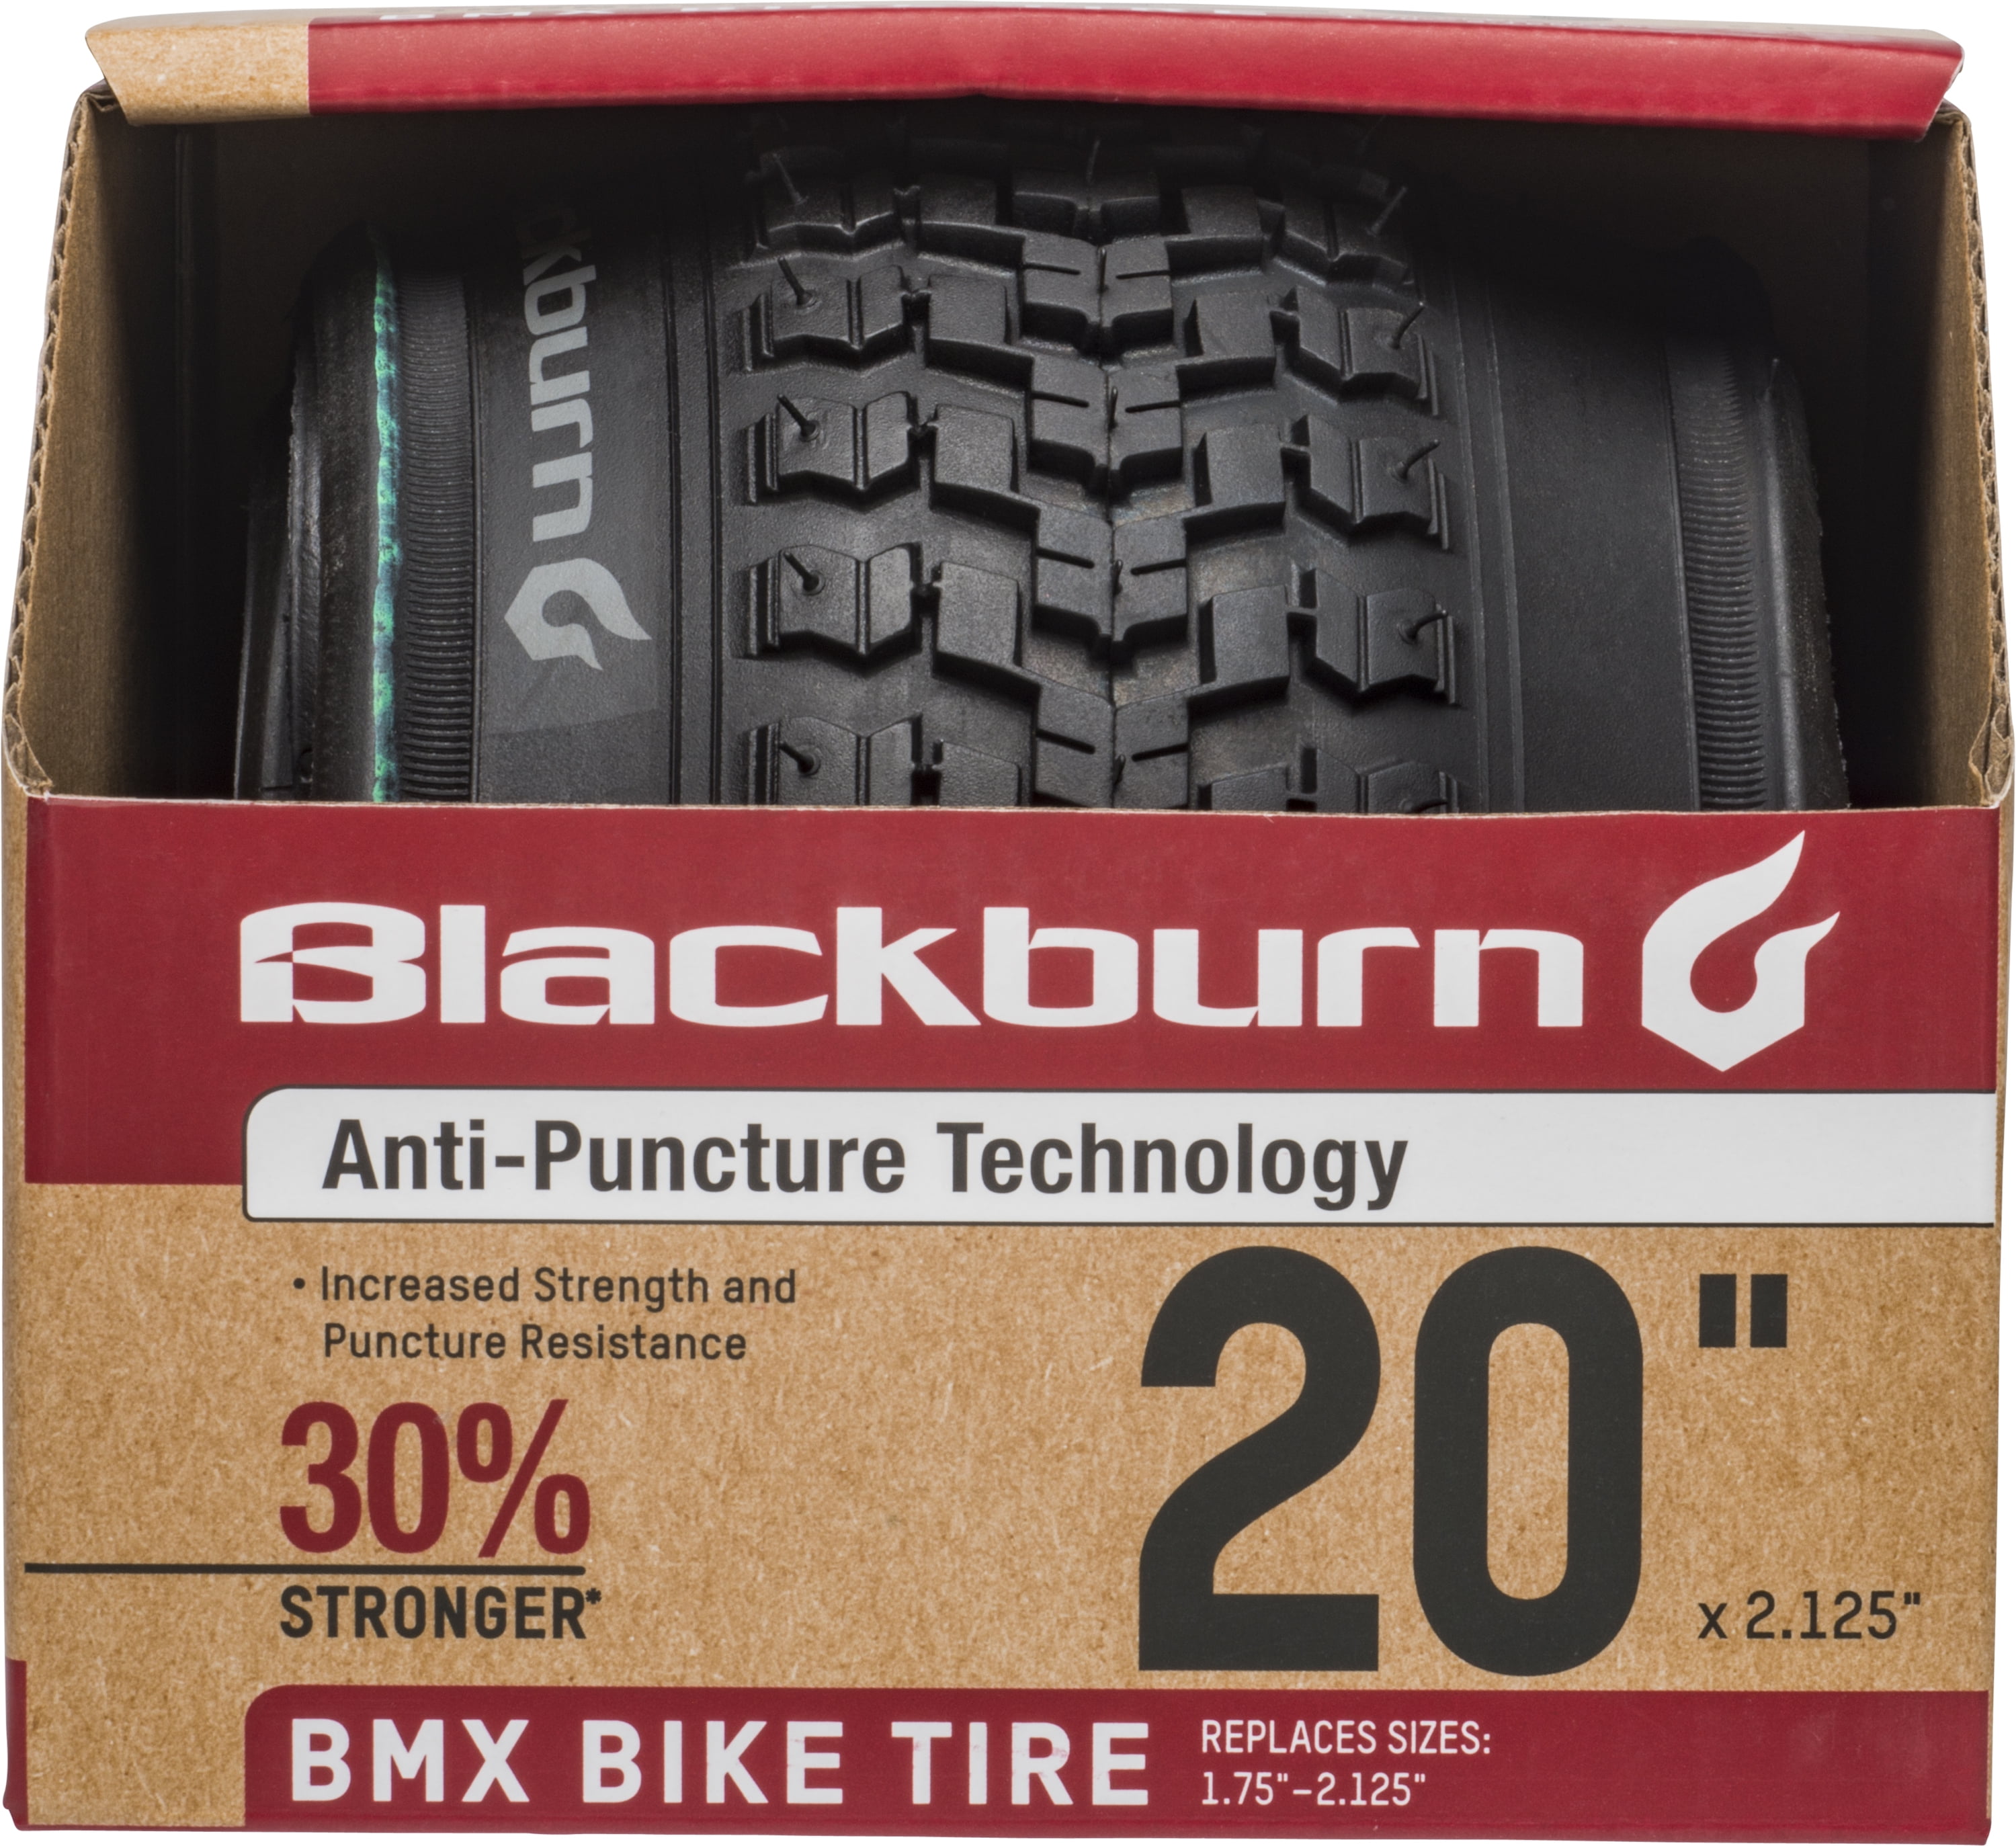 GET TWO TIRES TIRES 20" X 2.40 PAIR RED BMX 